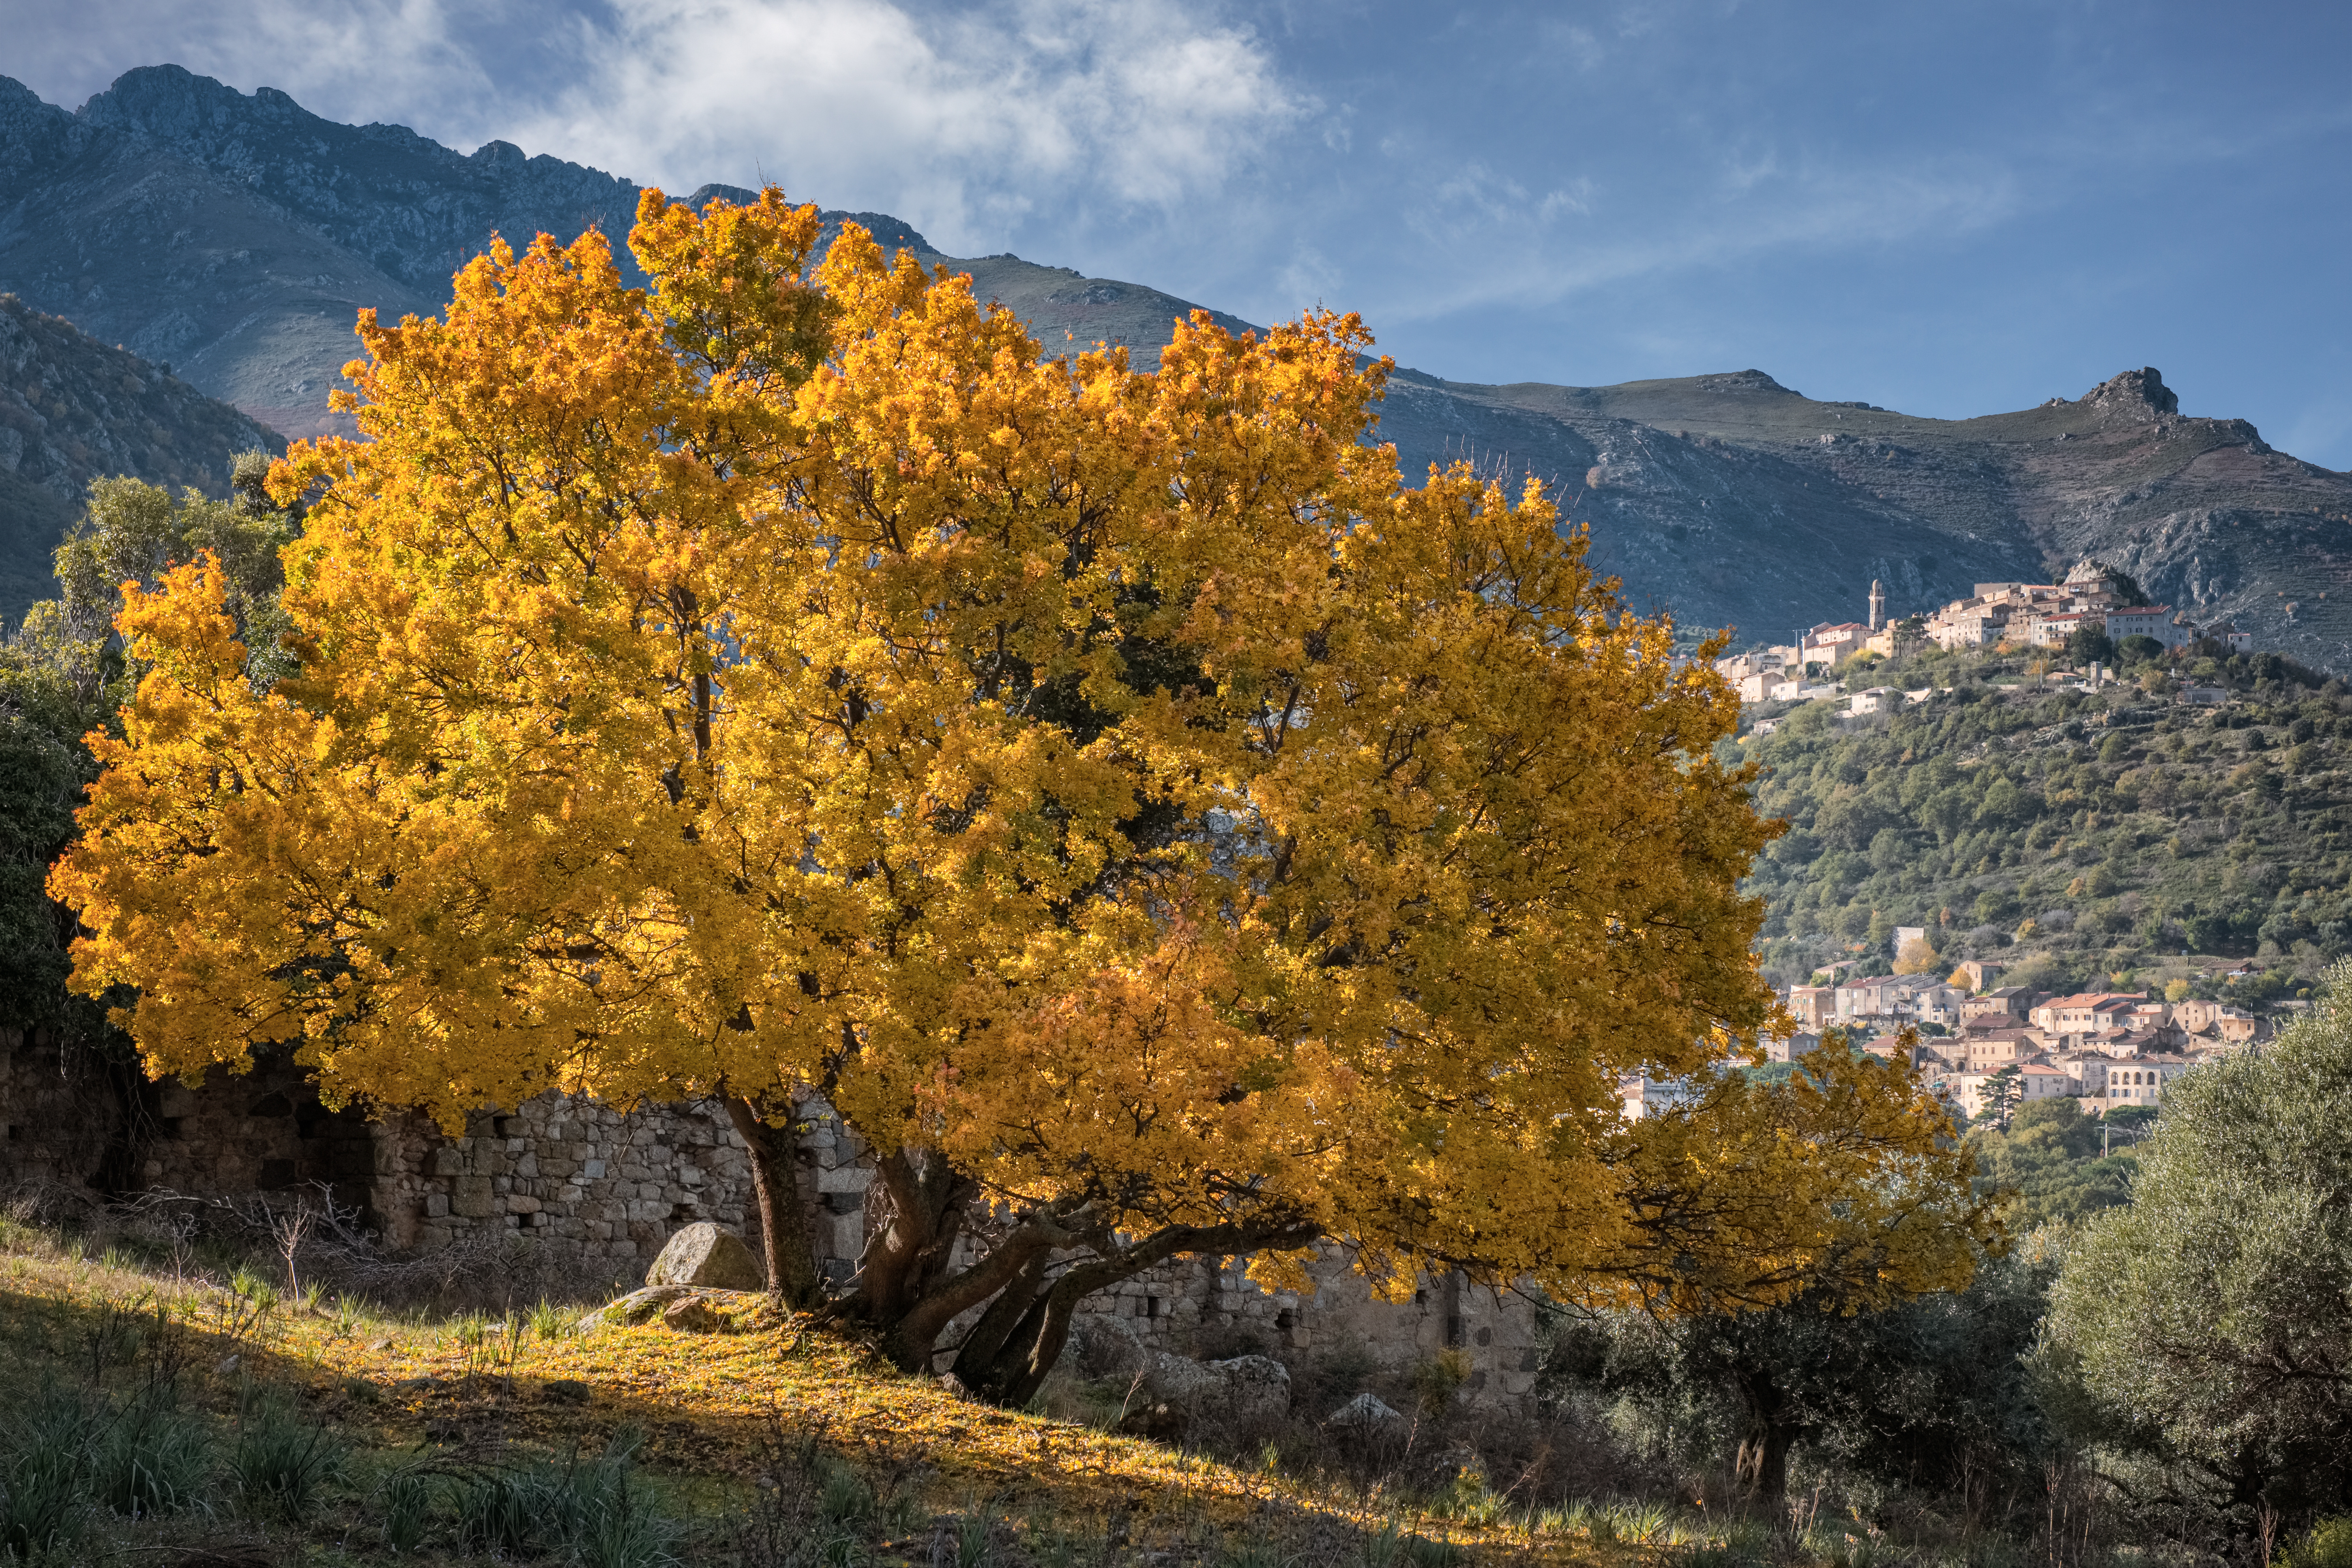 Golden autumn foliage of a large Montpellier Maple (Acer Monspessulanum) in the Balagne region of Corsica with the mountain villages of Ville di Paraso and Speloncato in the distance.